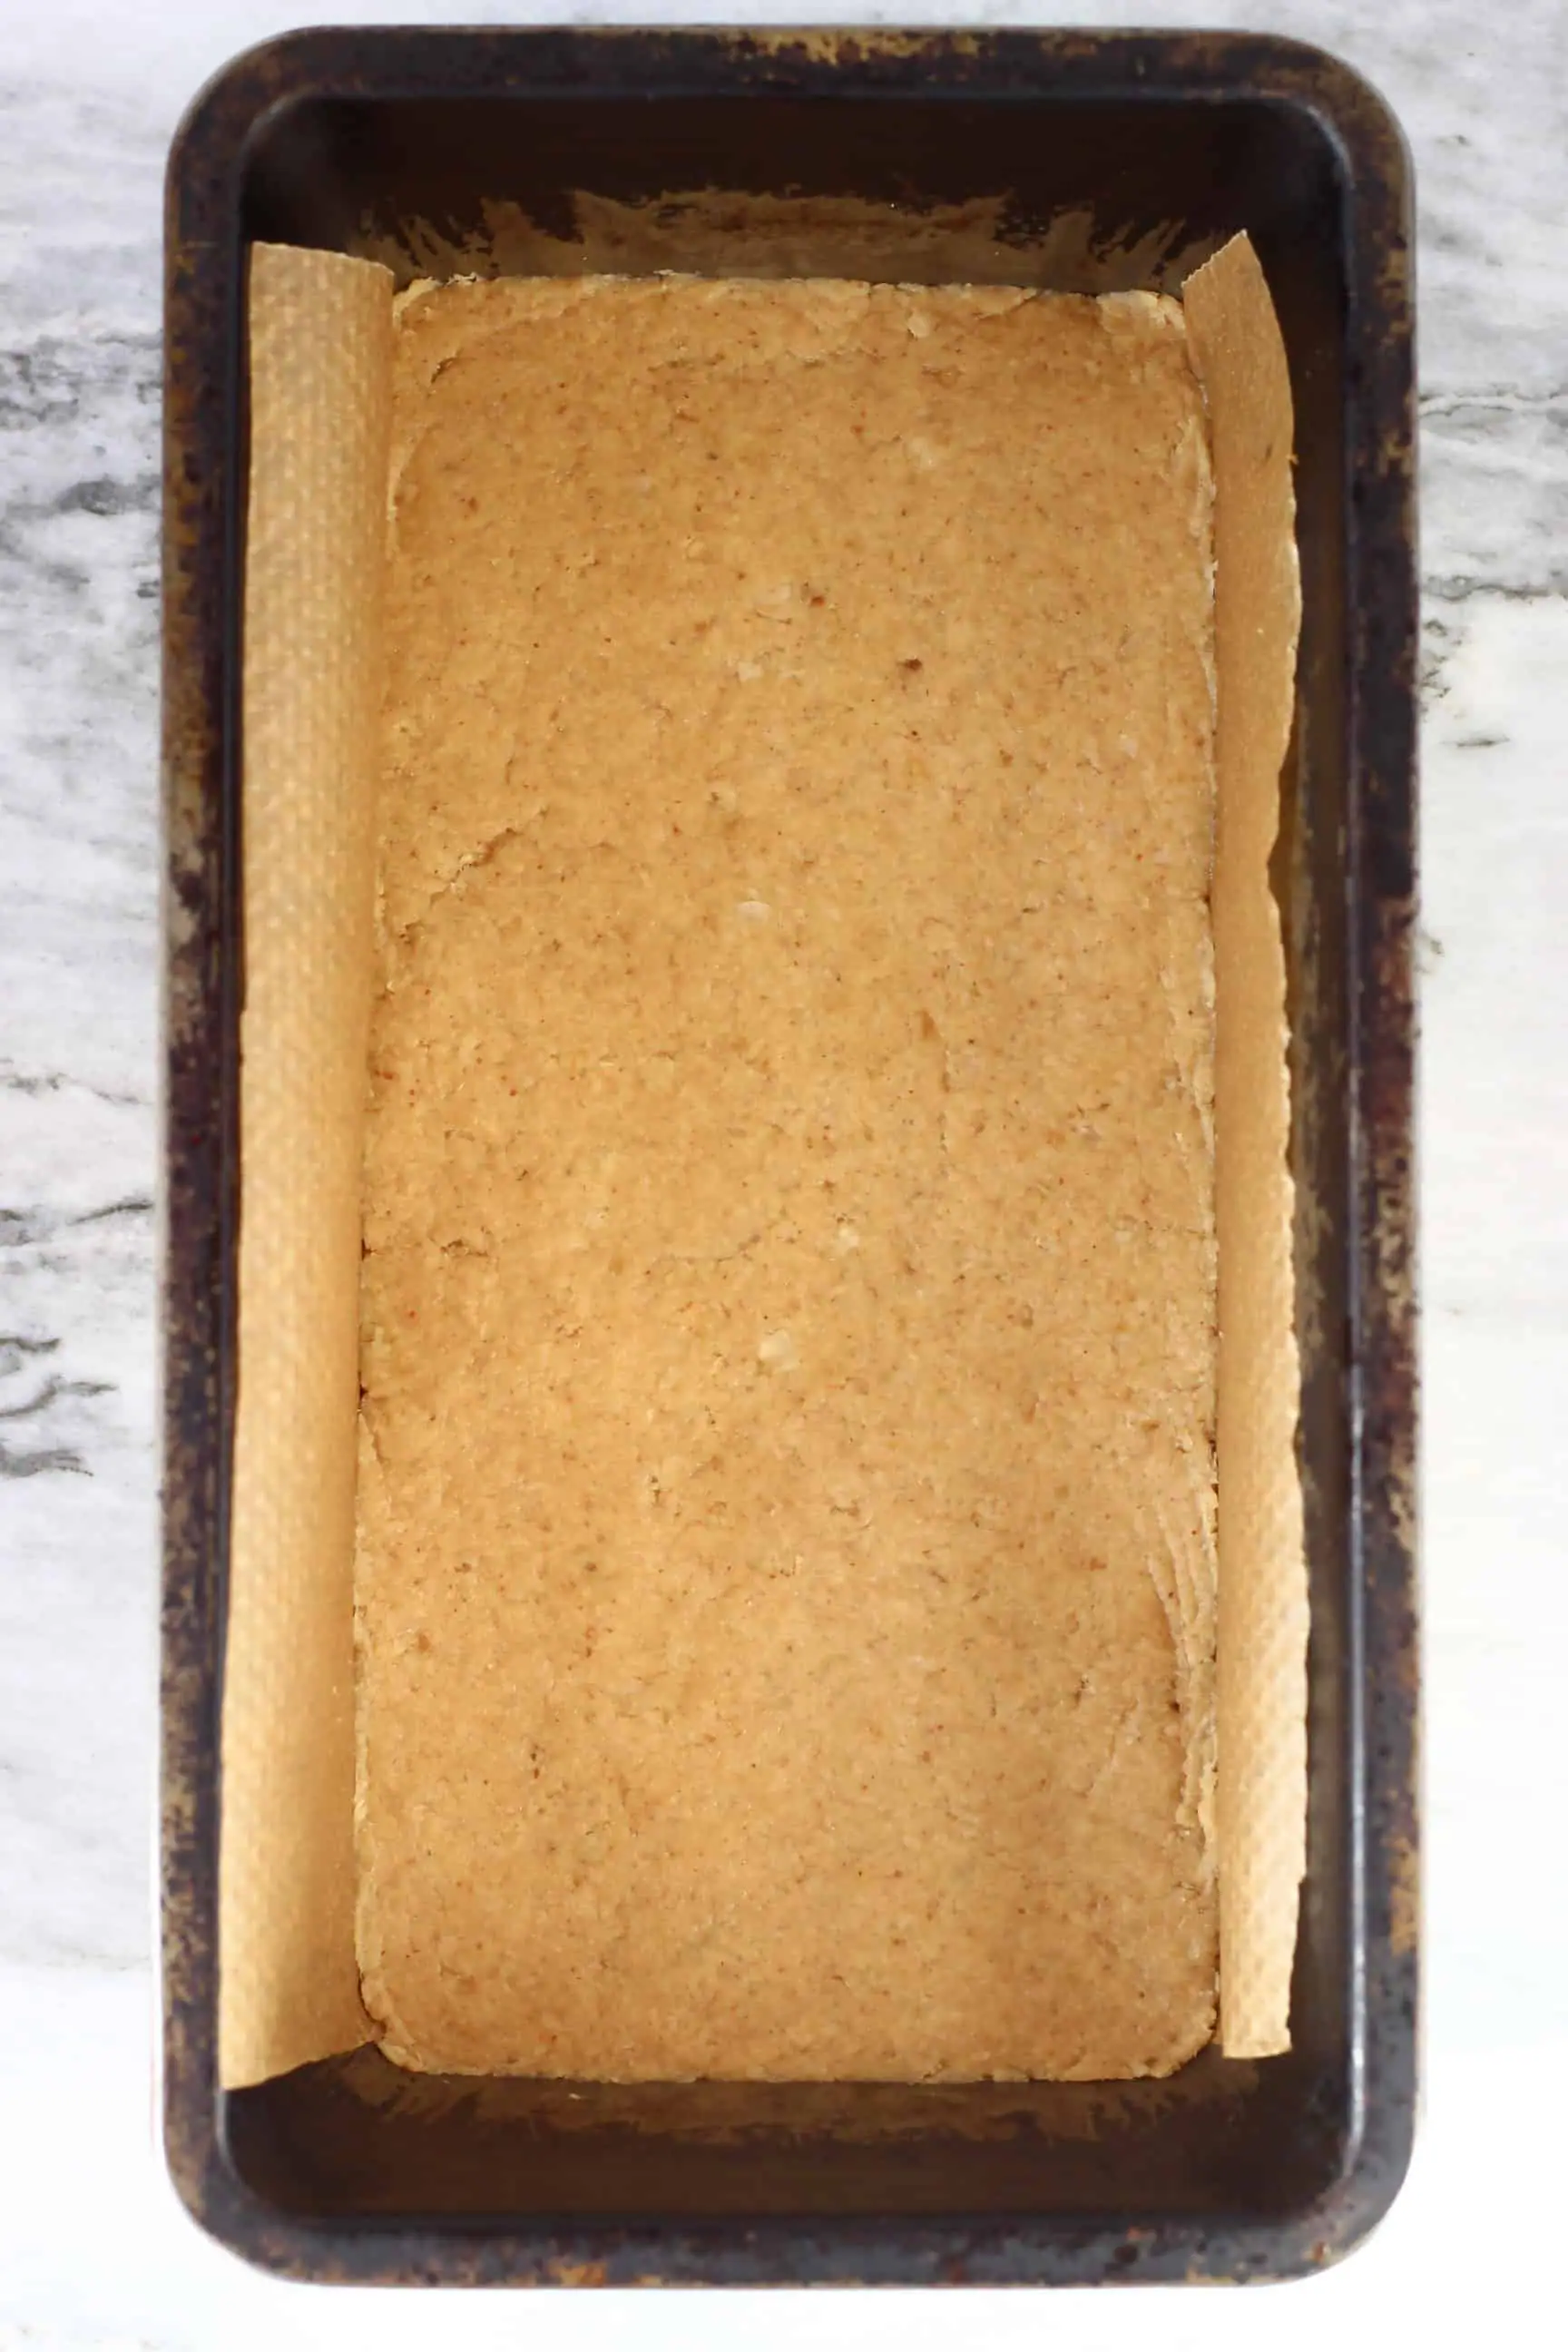 Peanut butter bar mixture in a loaf tin lined with baking paper